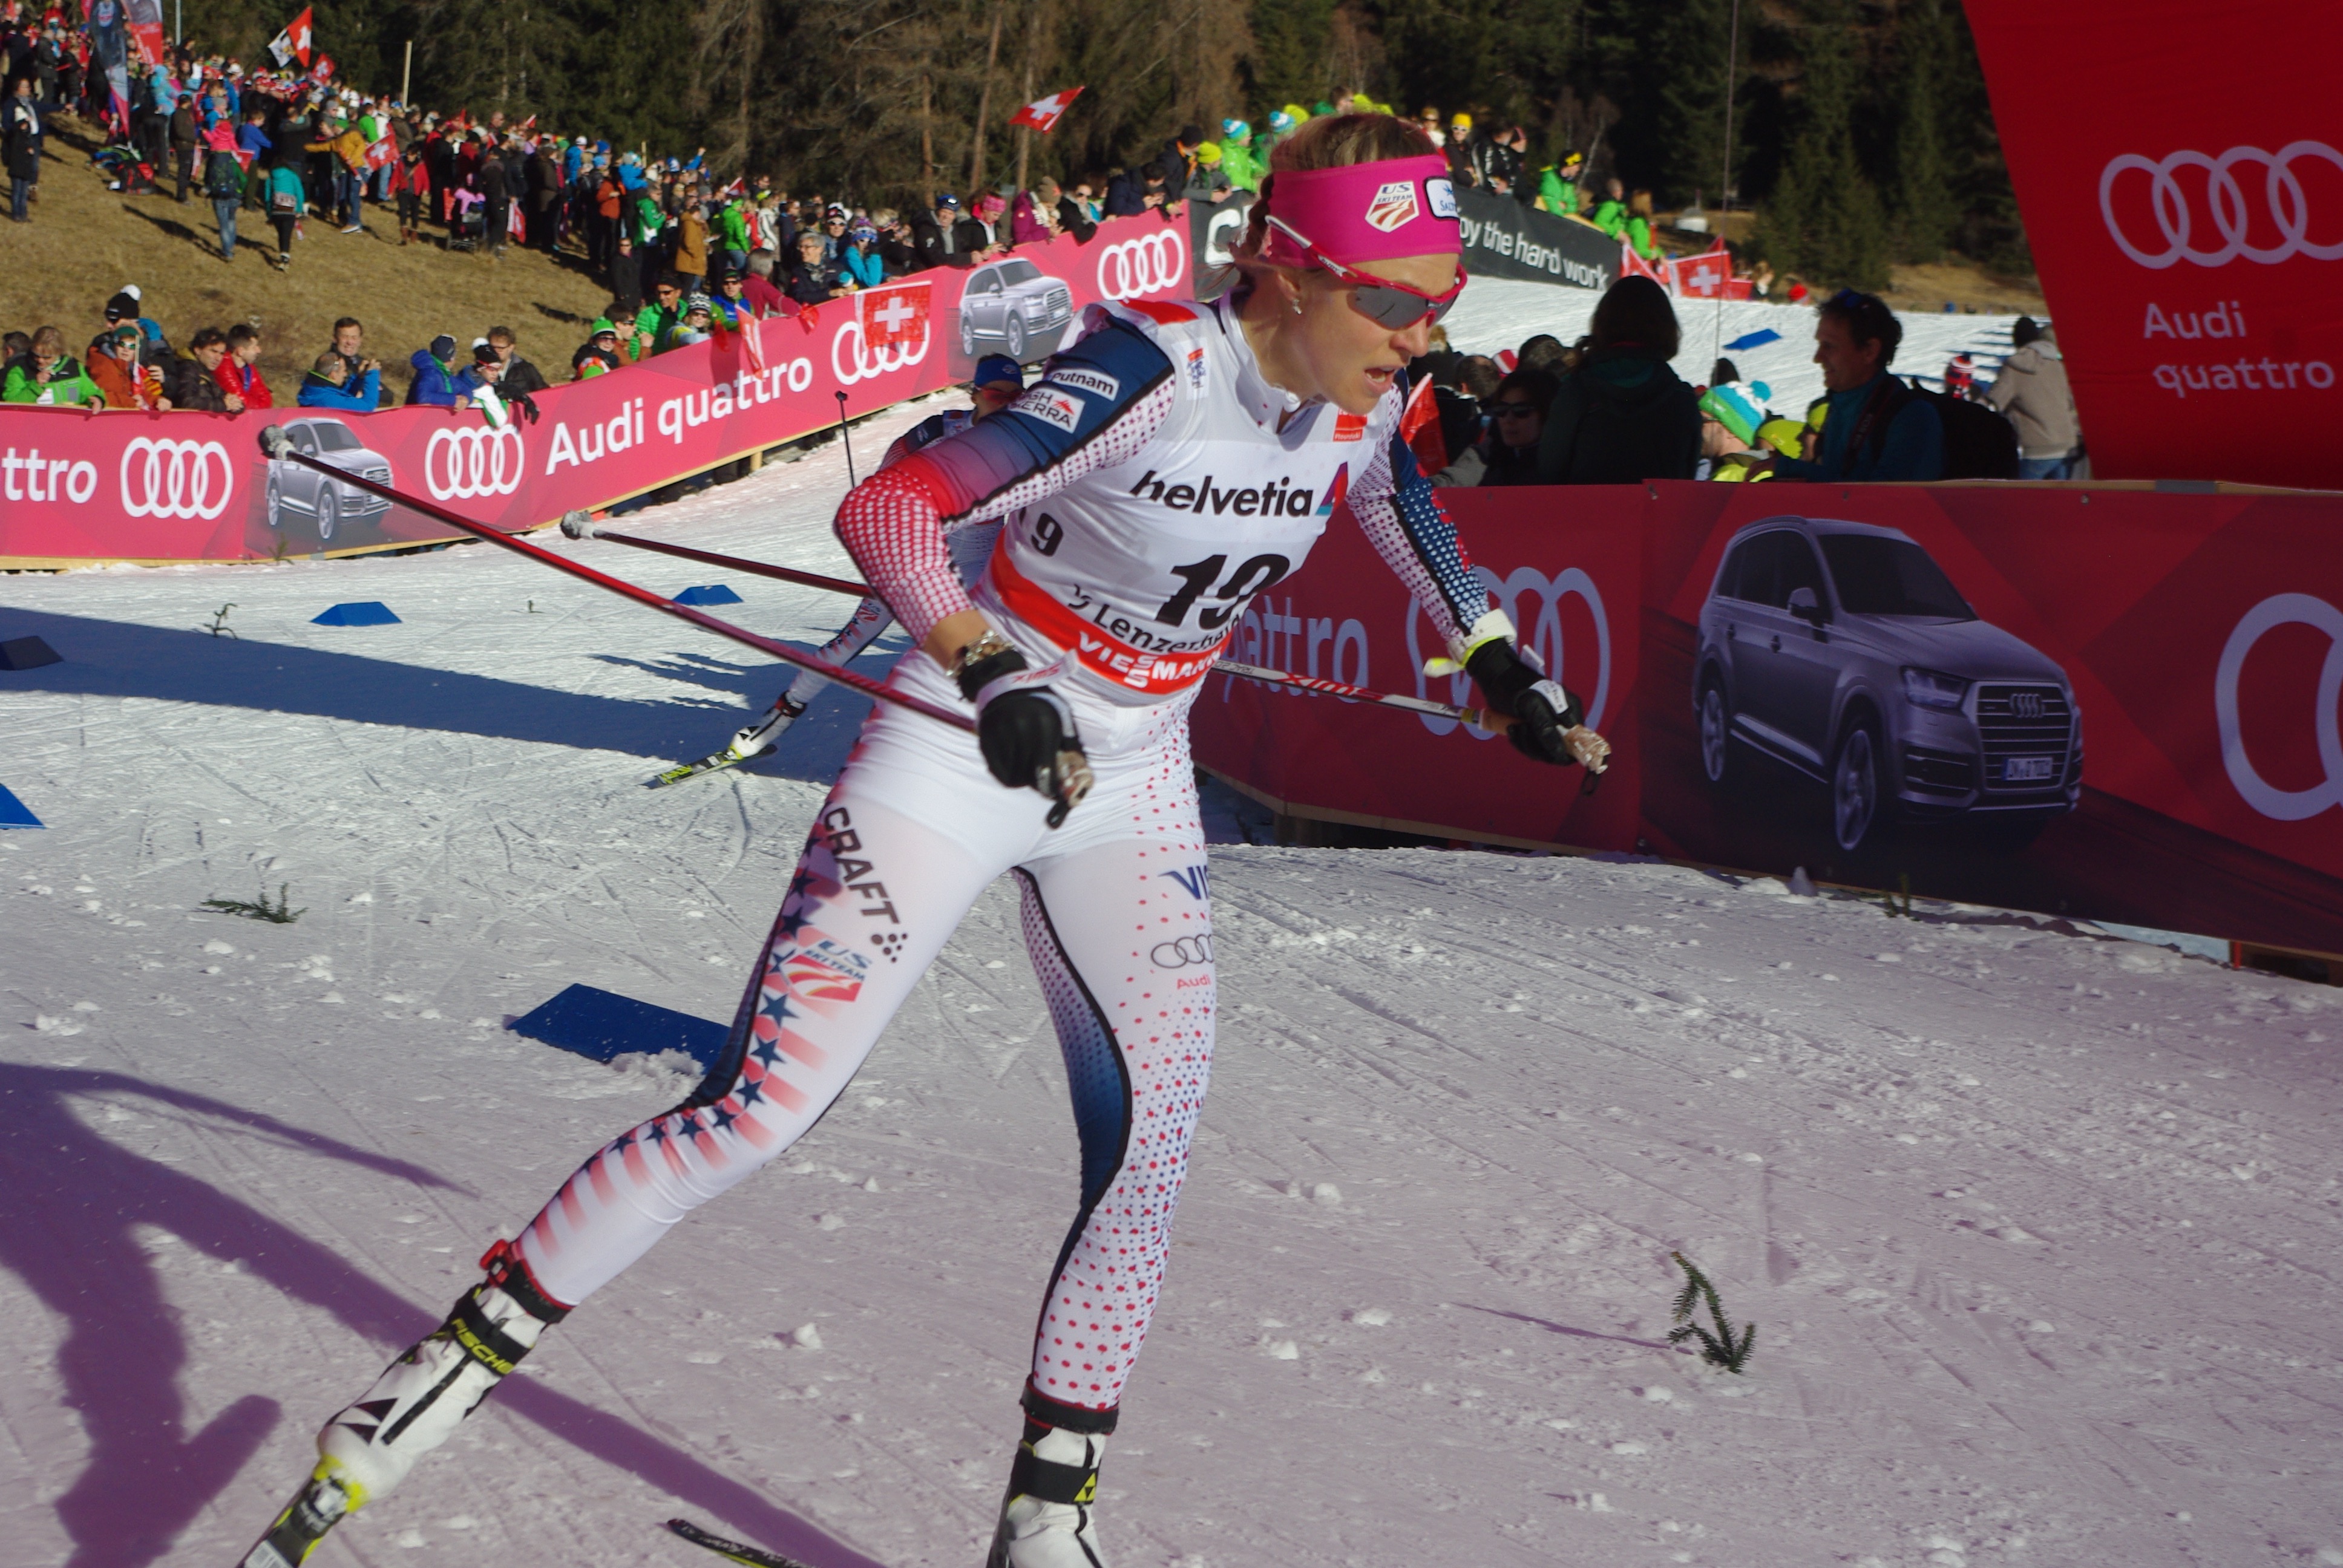 Sadie Bjornsen (USA) finished seventh in today's World Cup sprint, just two hundredths of a second away from advancing to the final. Despite the disappointment of being oh-so-close, Bjornsen said she was thrilled with the result.